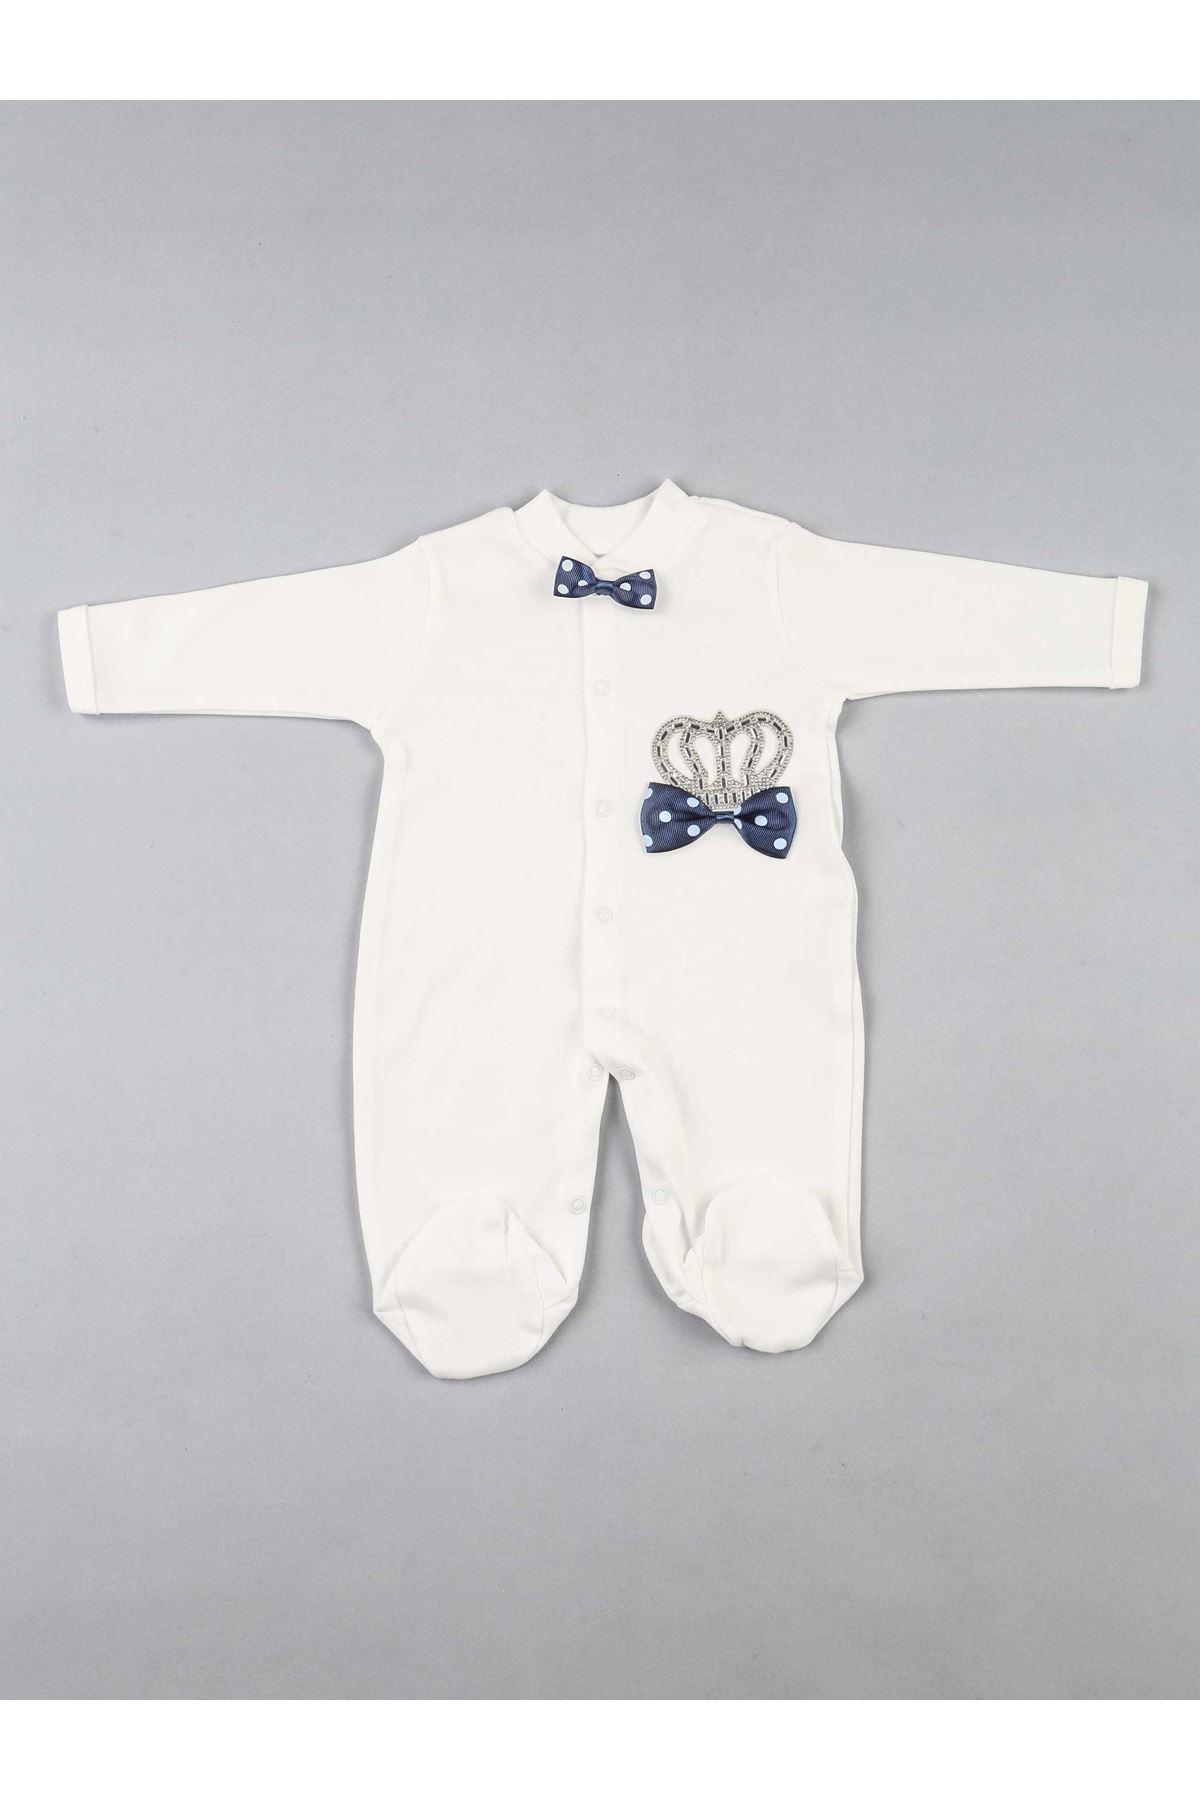 Navy blue king-crowned baby boy suit newborn hospital outlet rompers 3-piece cotton overalls gloves hat sets fashion style